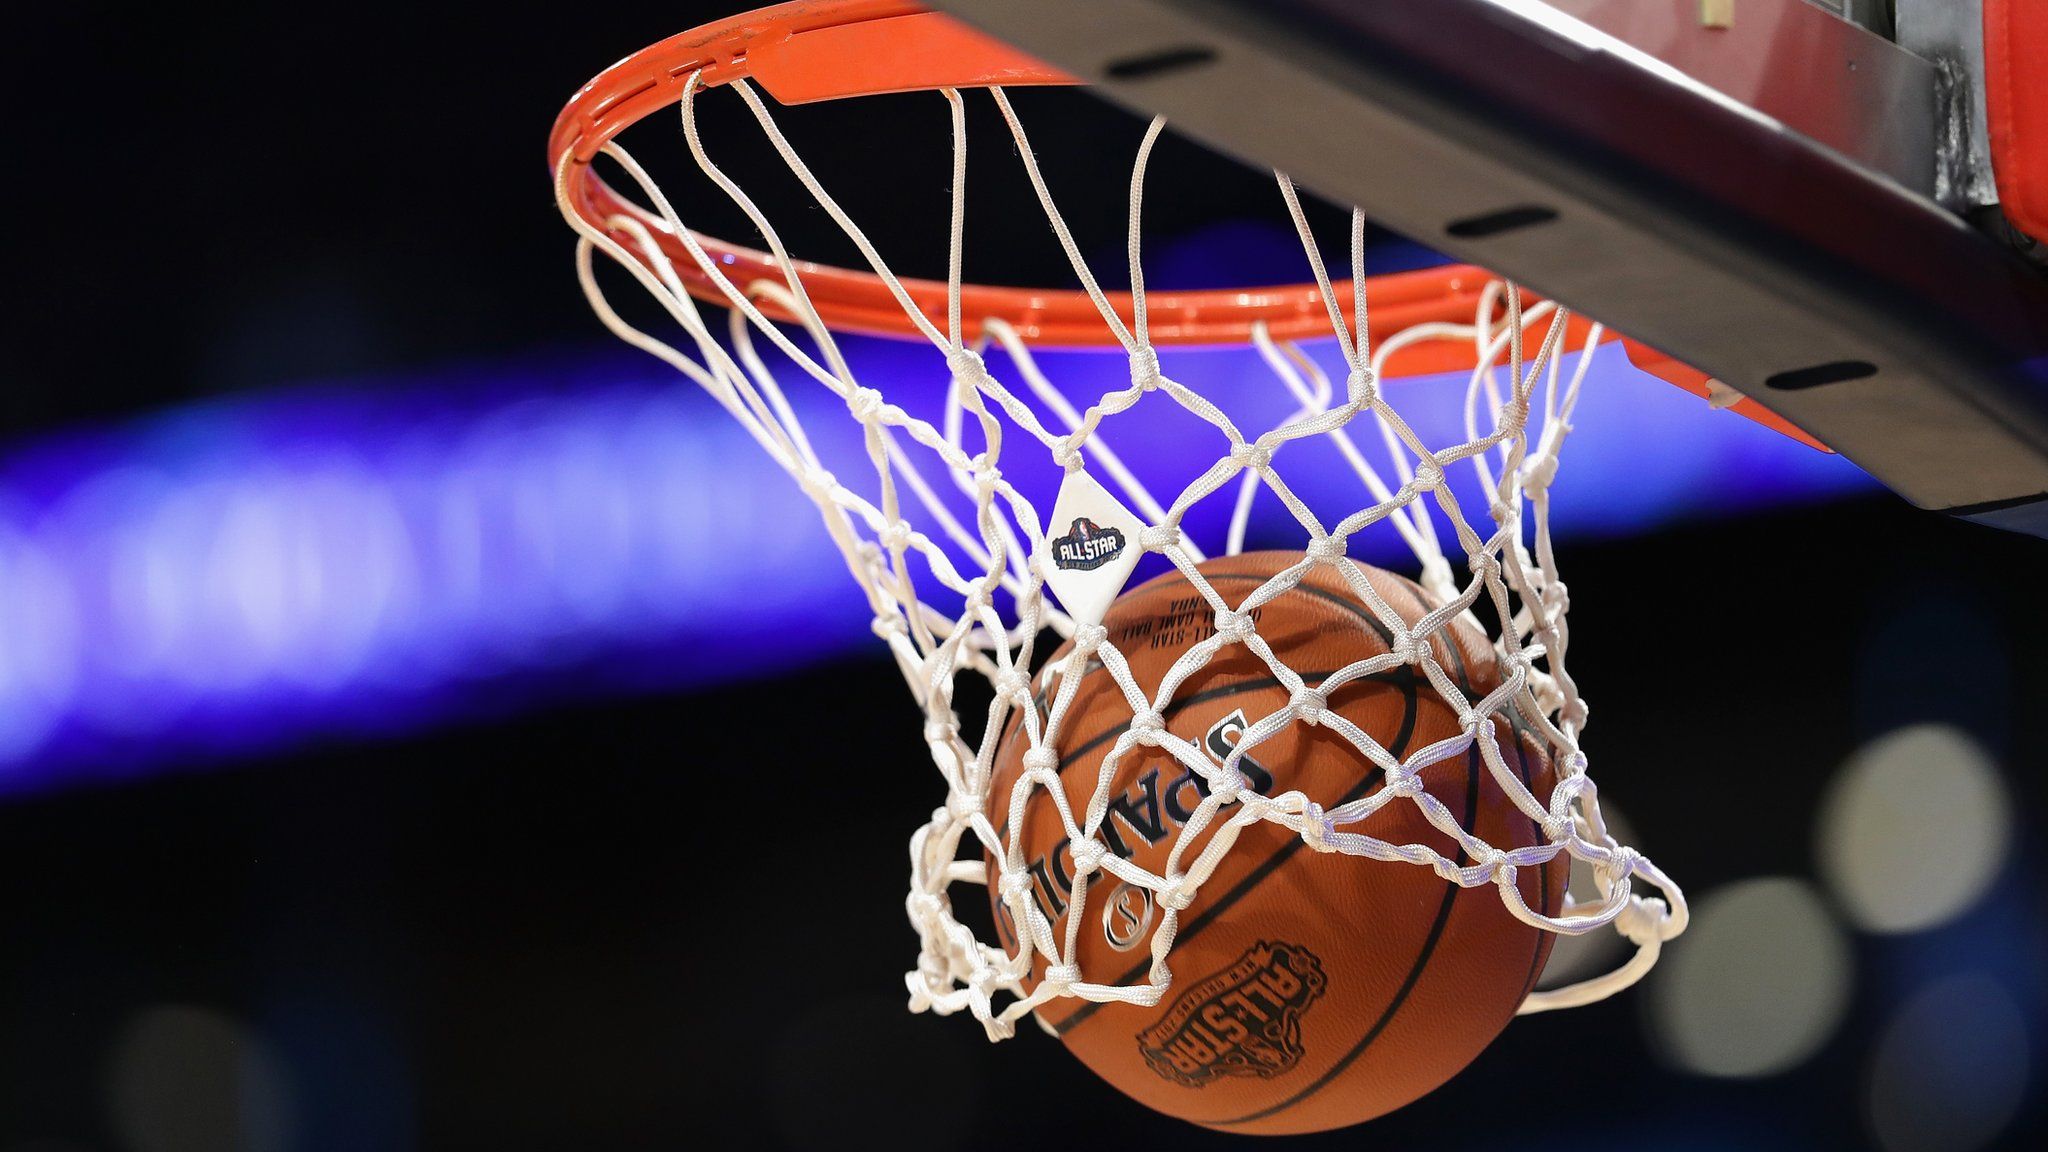 US college basketball has been caught up in a corruption investigation